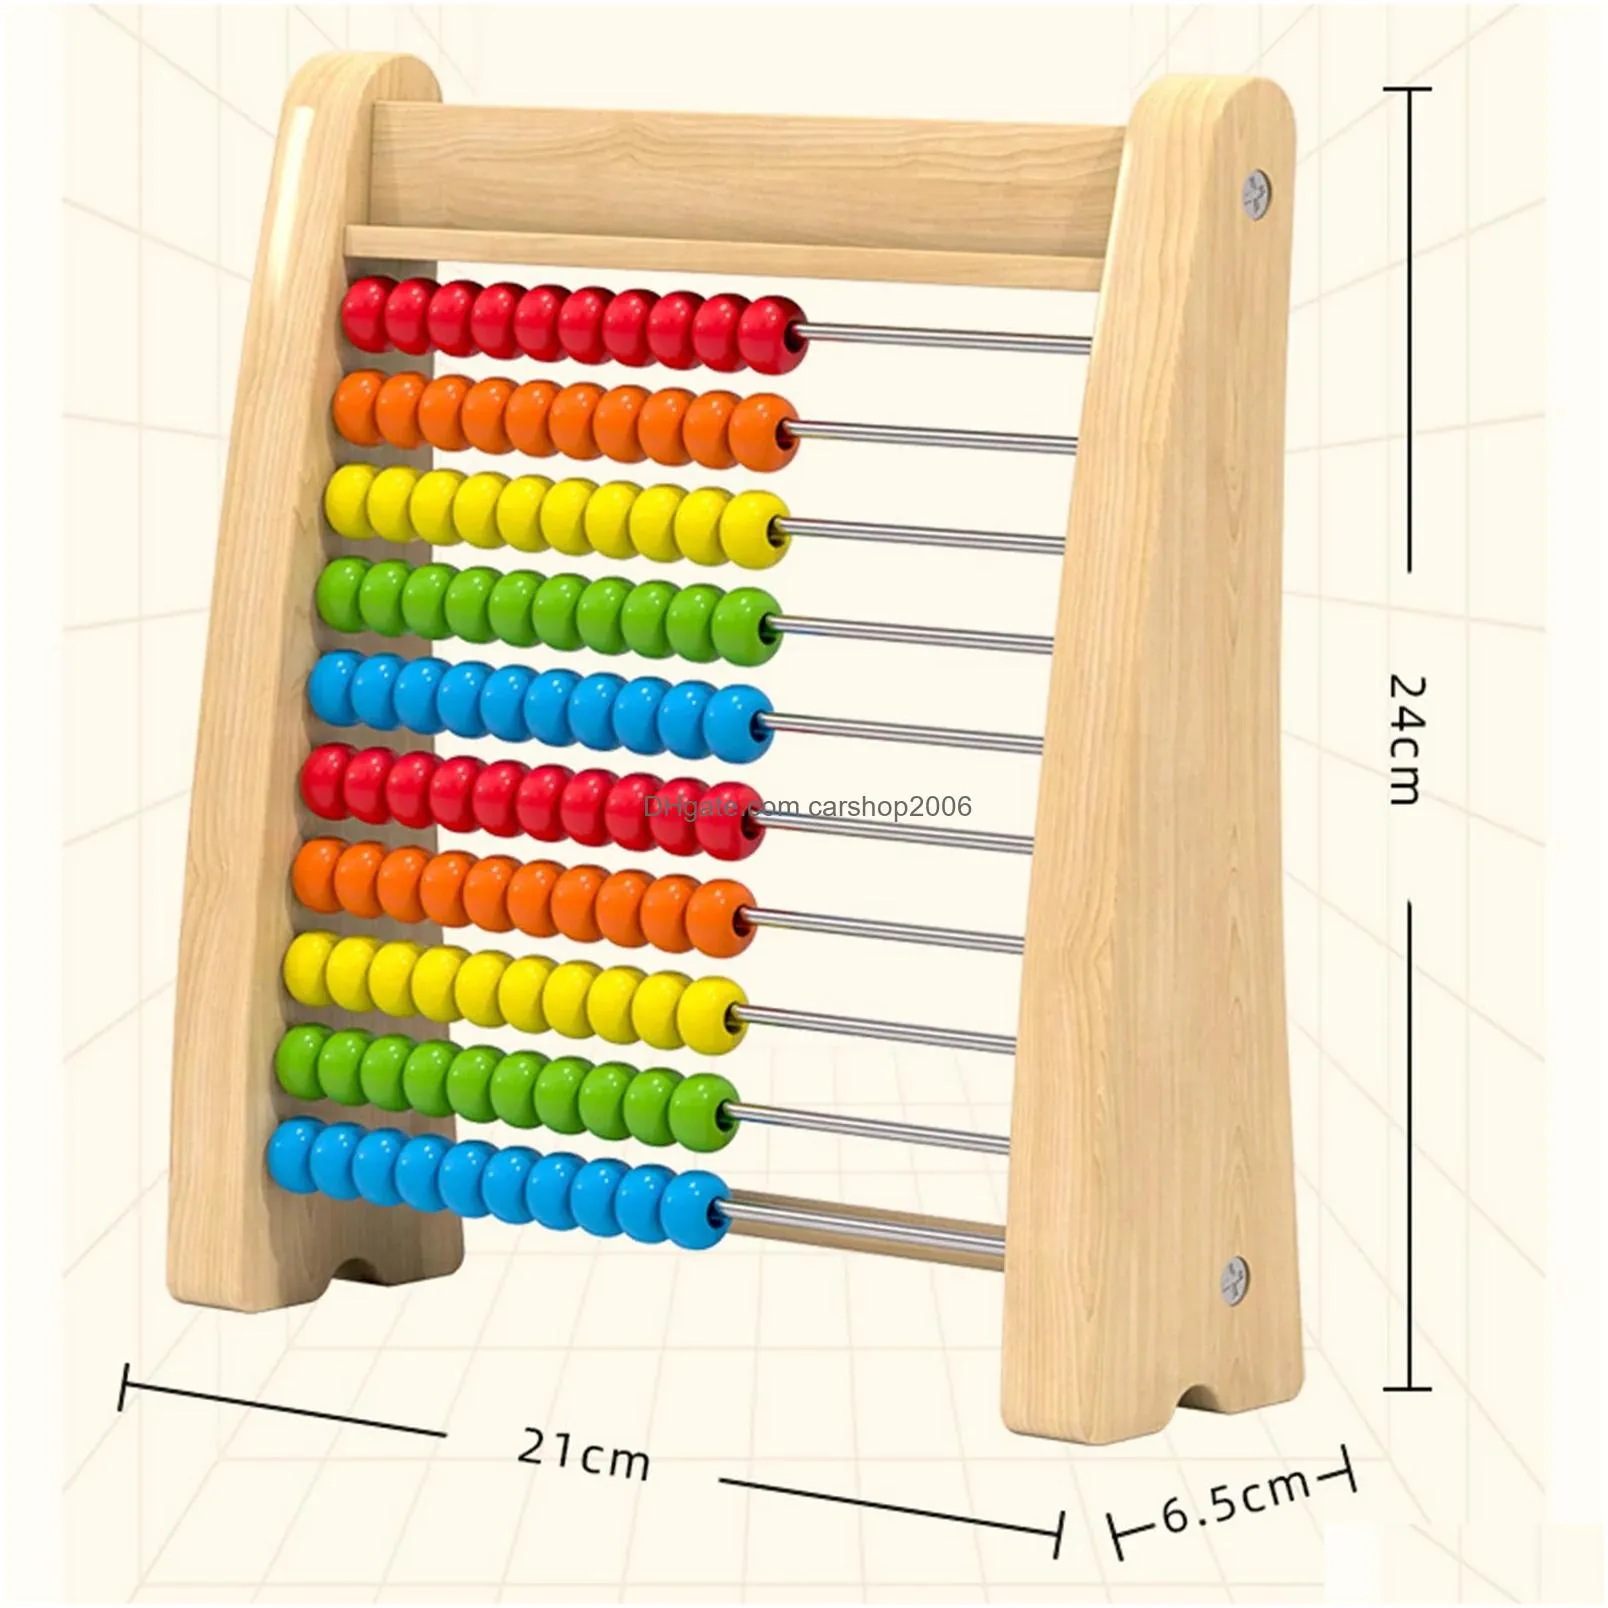 add subtract abacus ten frame set math counters for kids smooth edges educational counting frames toy for children preschool